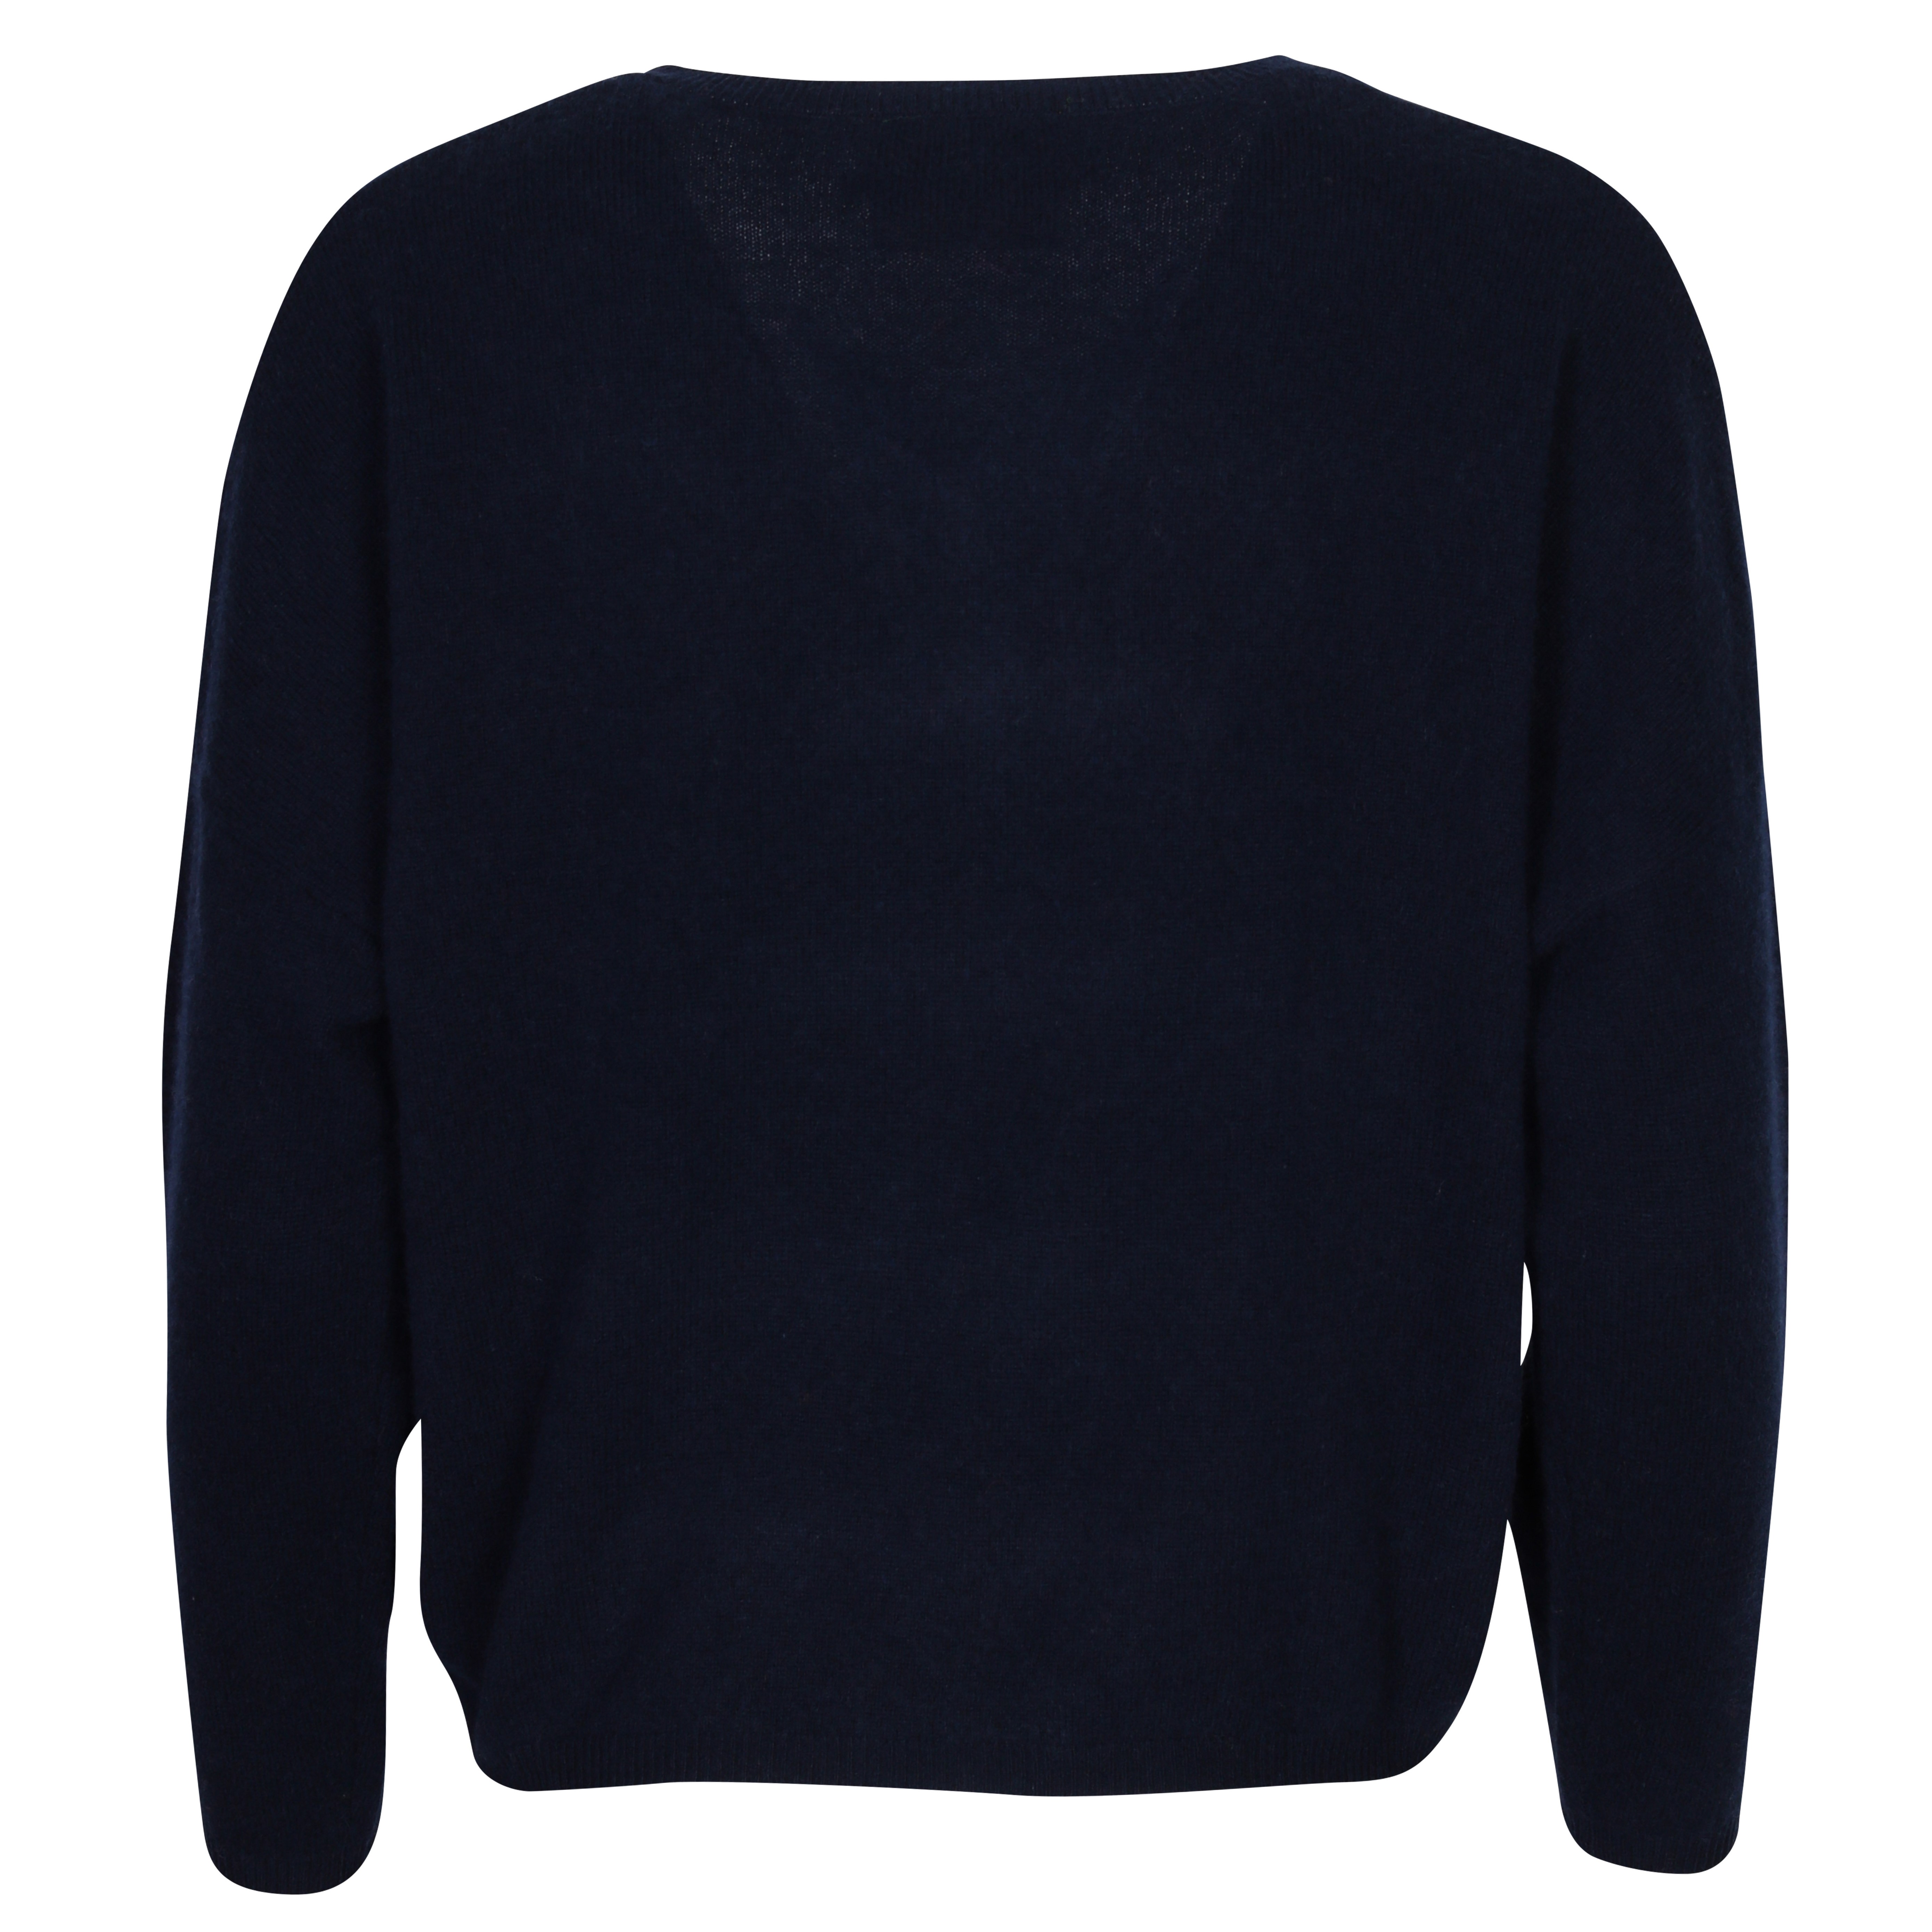 Absolut Cashmere Alicia Pullover in Nuit XS